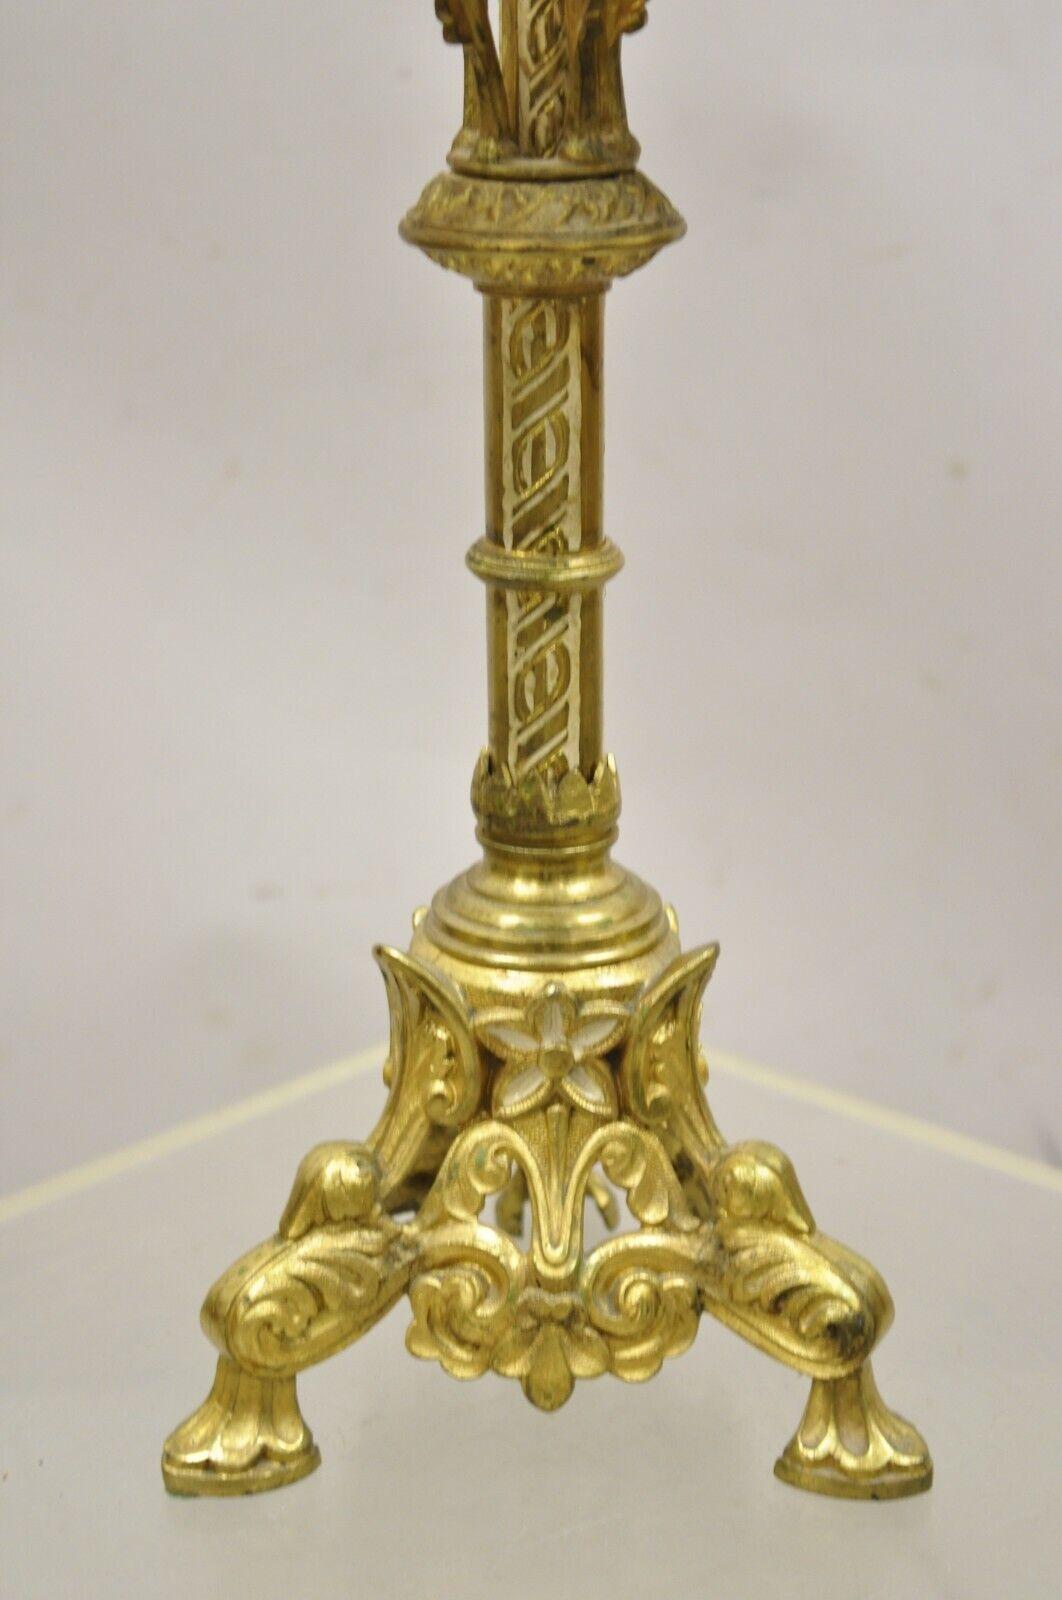 Antique Gothic Revival Gold Bronze Figural Candelabra Table Lamps, a Pair For Sale 2